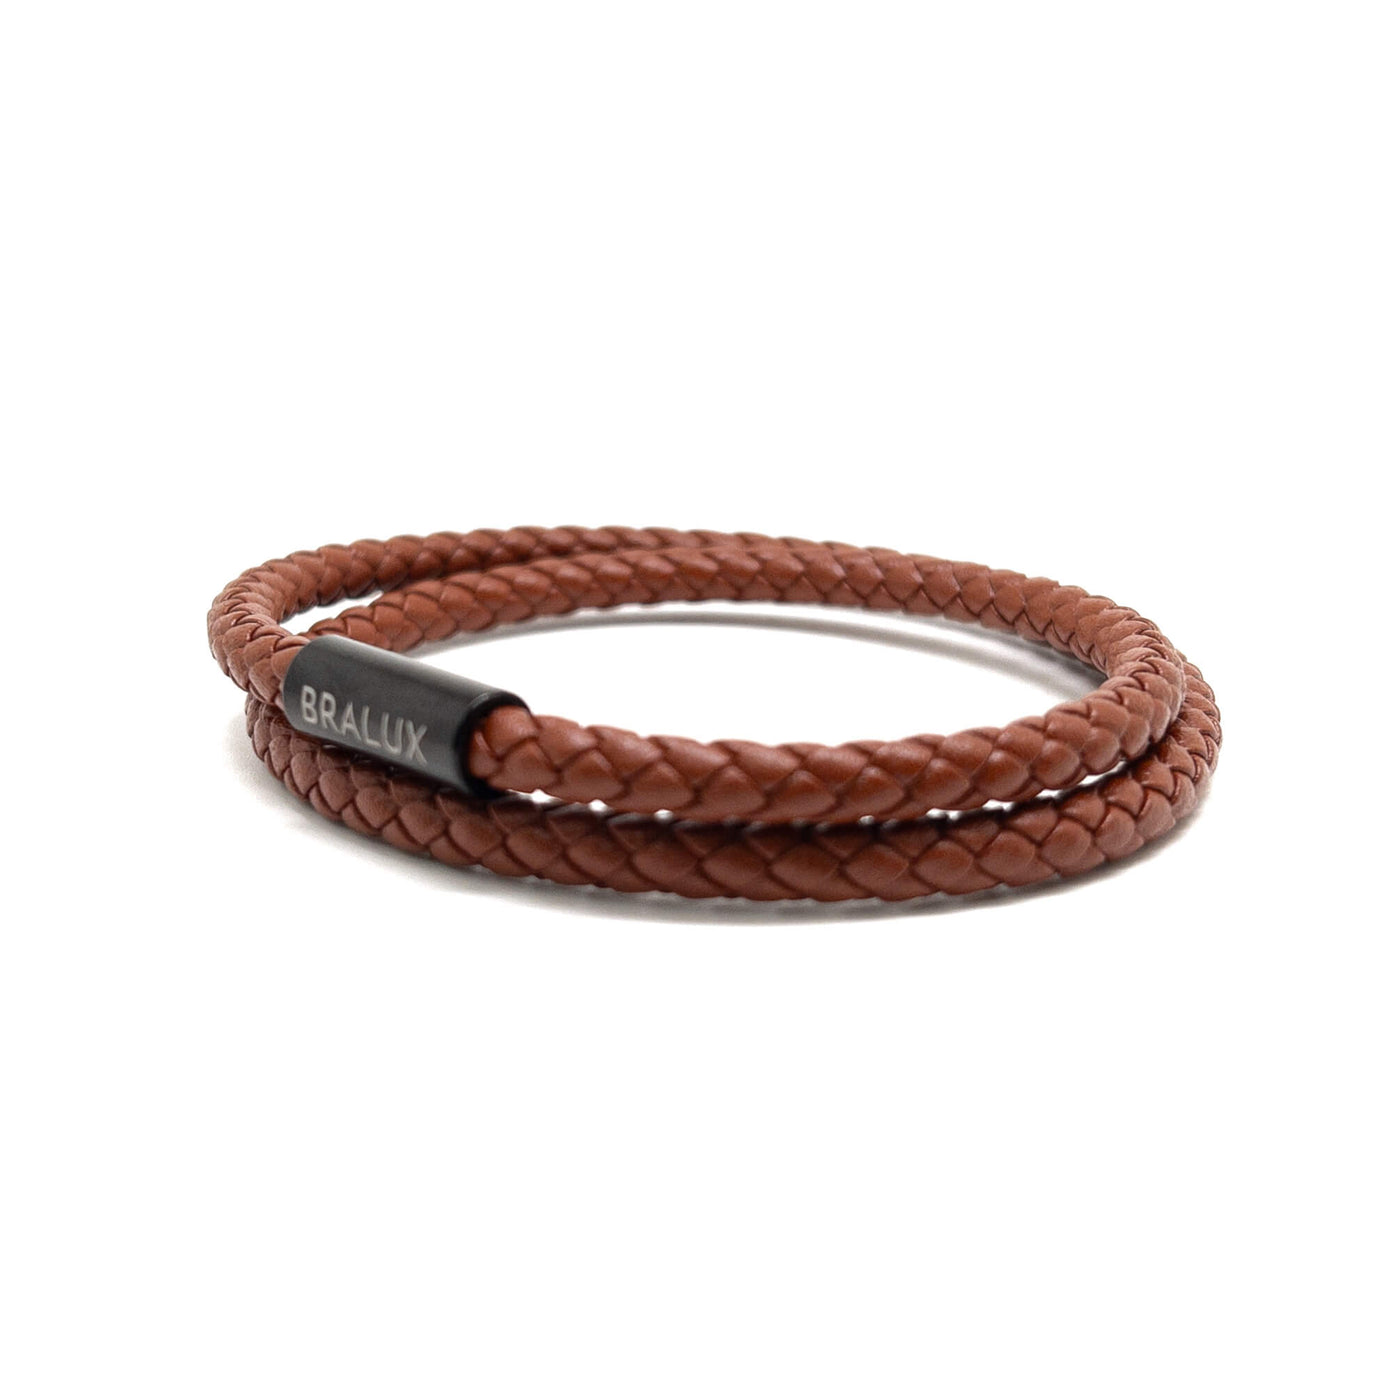 The Duo Brown Leather Bracelet with Black buckle